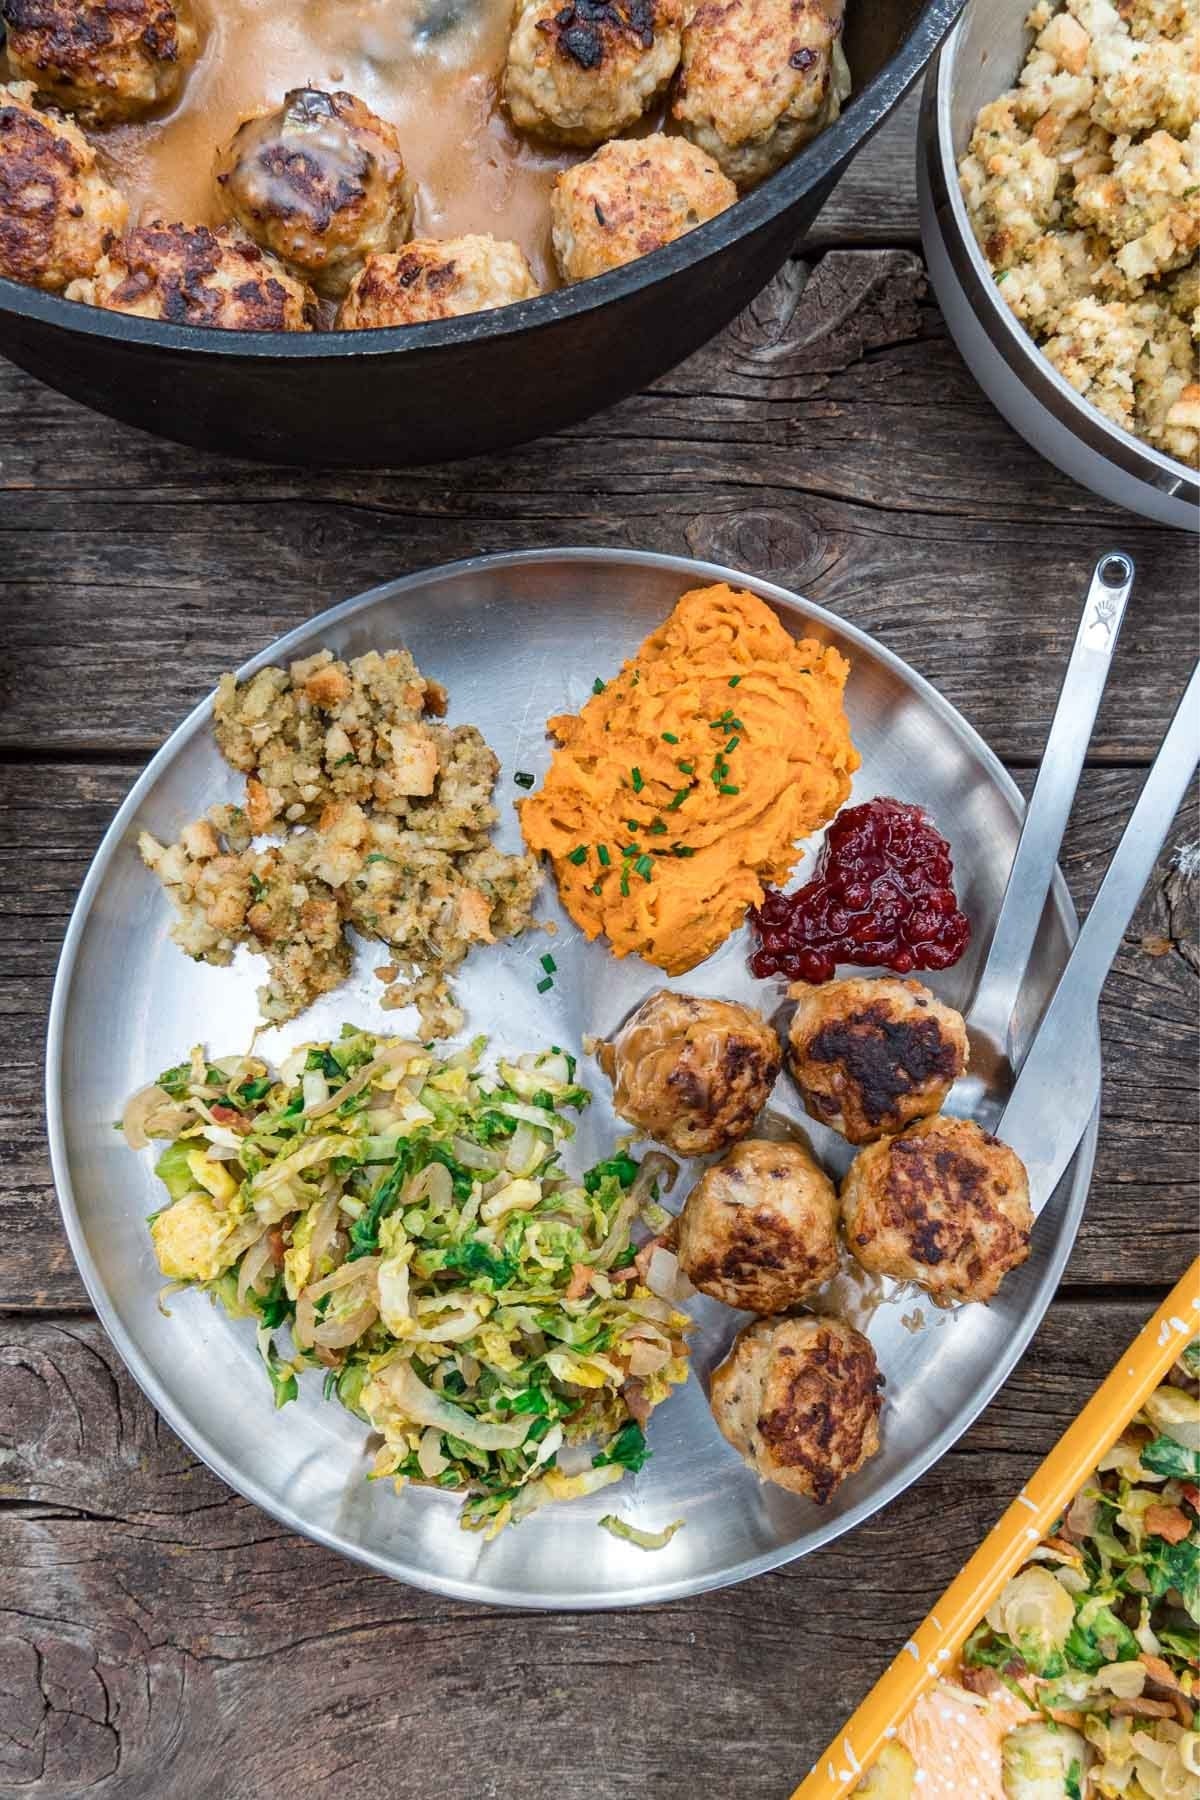 A plate filled with meatballs, brussels sprouts, and sweet potatoes on a table surrounded by serving dishes